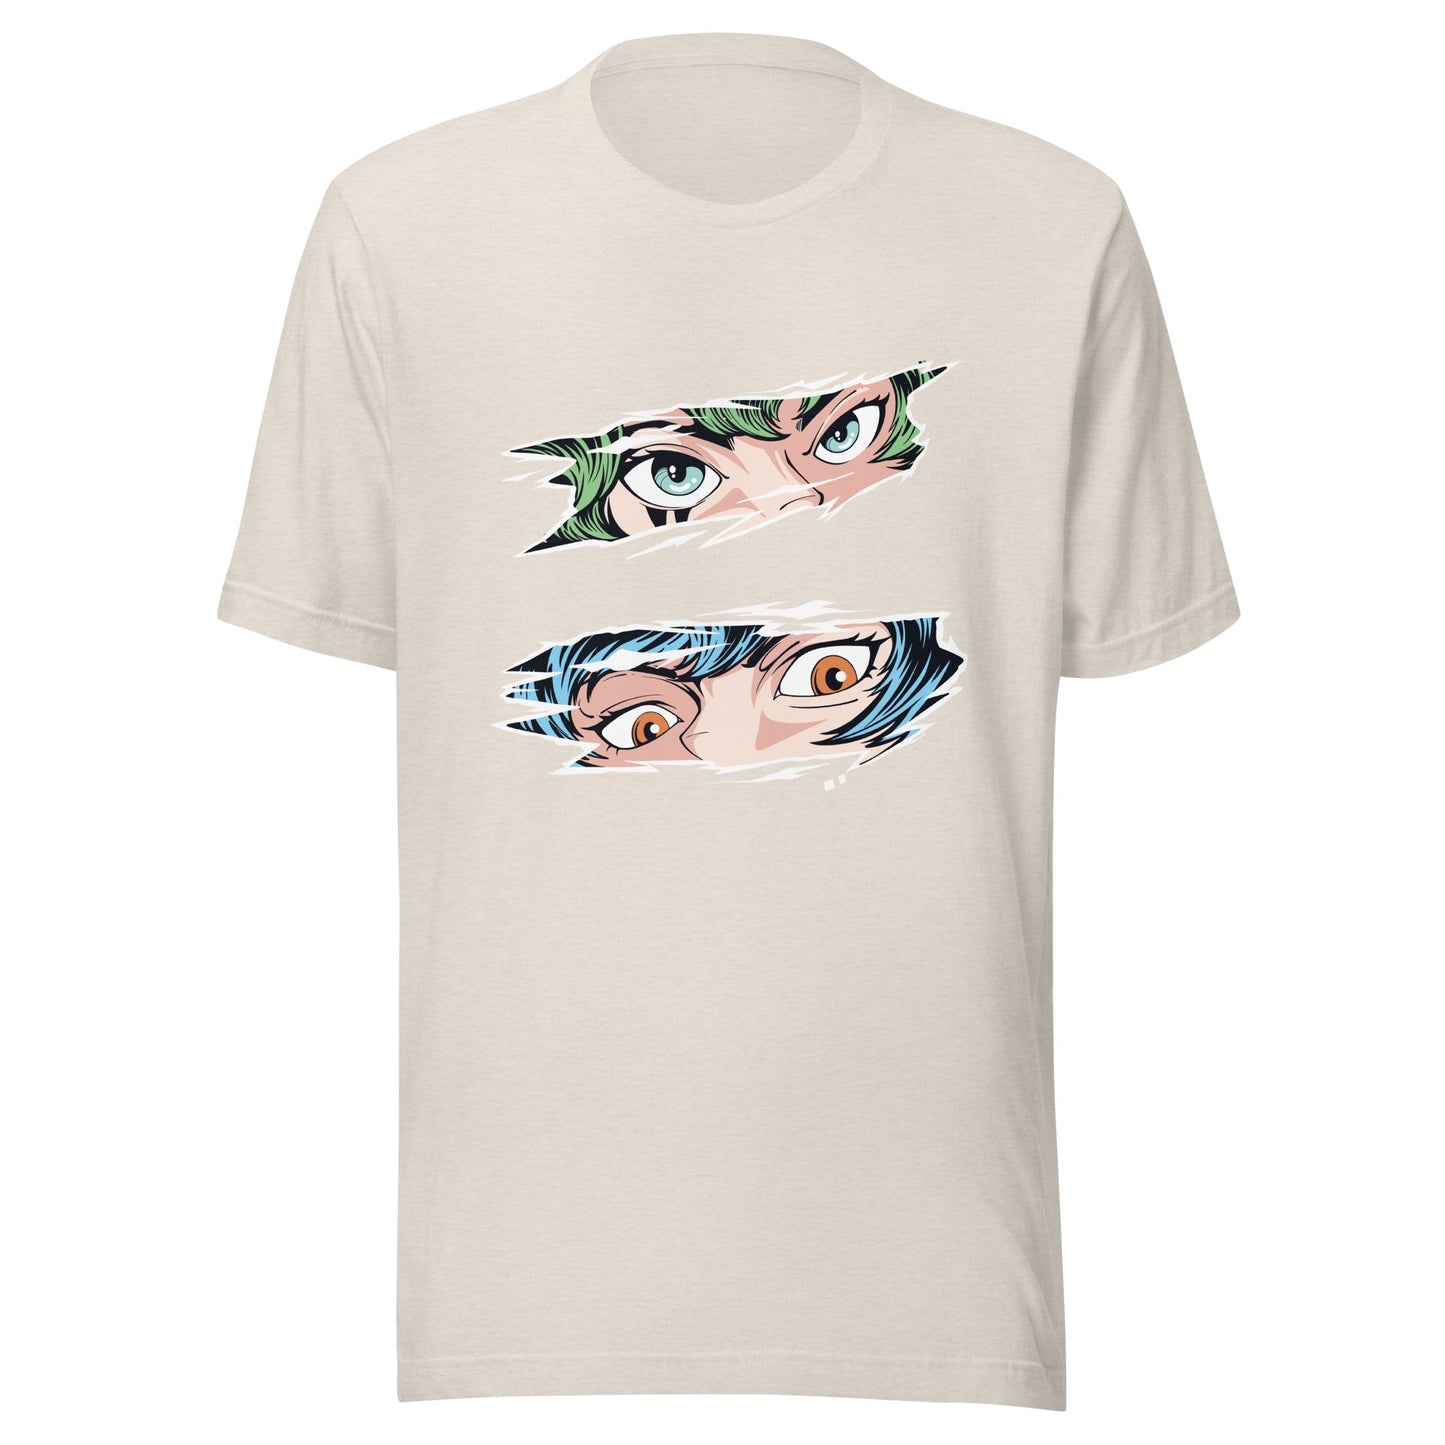 Anime Eye T-Shirt - Express Your Unique Style with Eye-Catching Designs